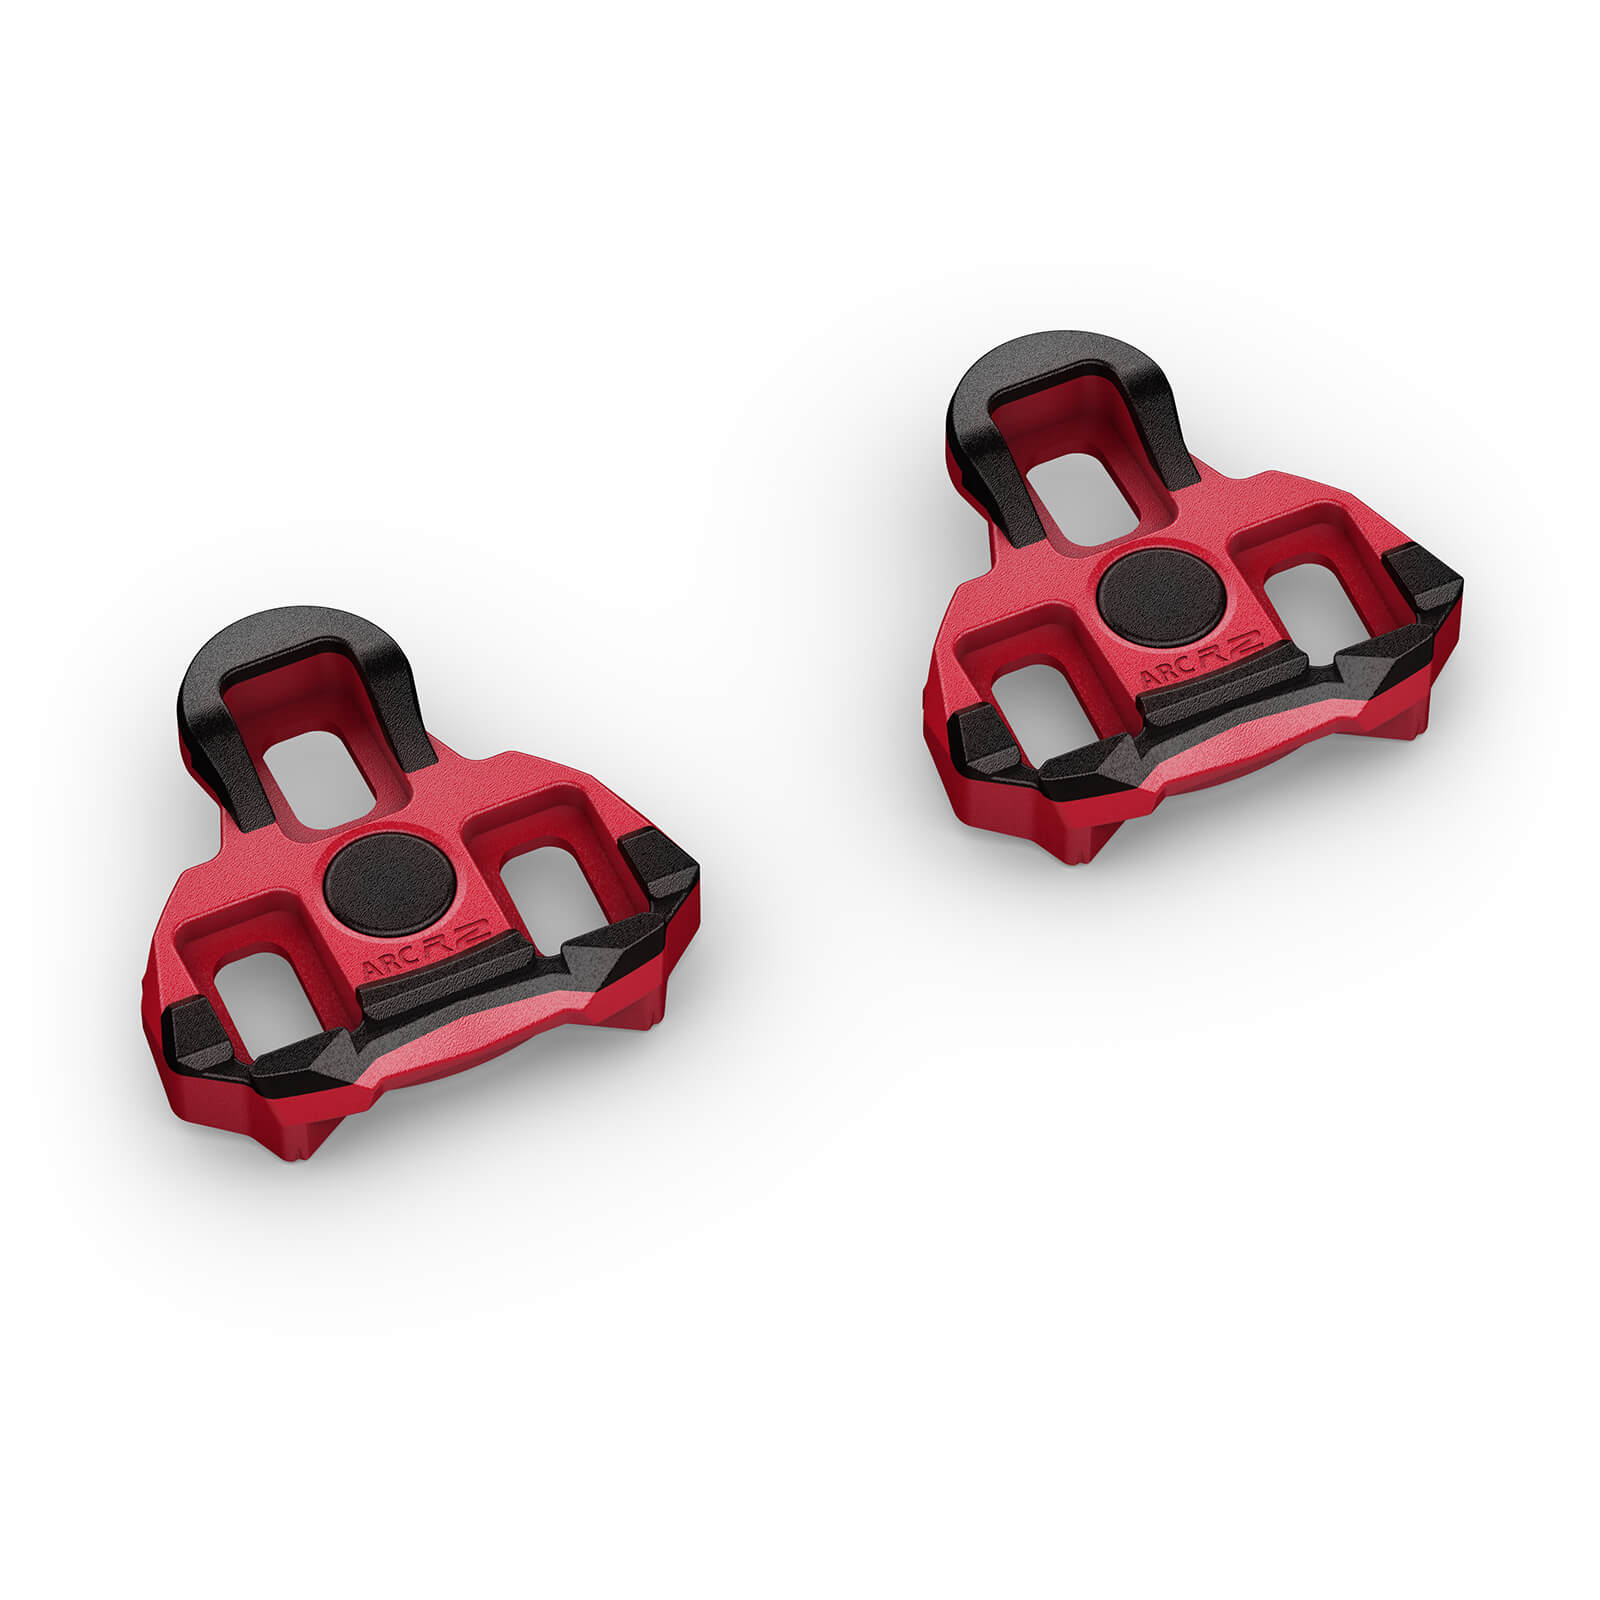 Garmin Rally RK Replacement Cleats - 6 degree